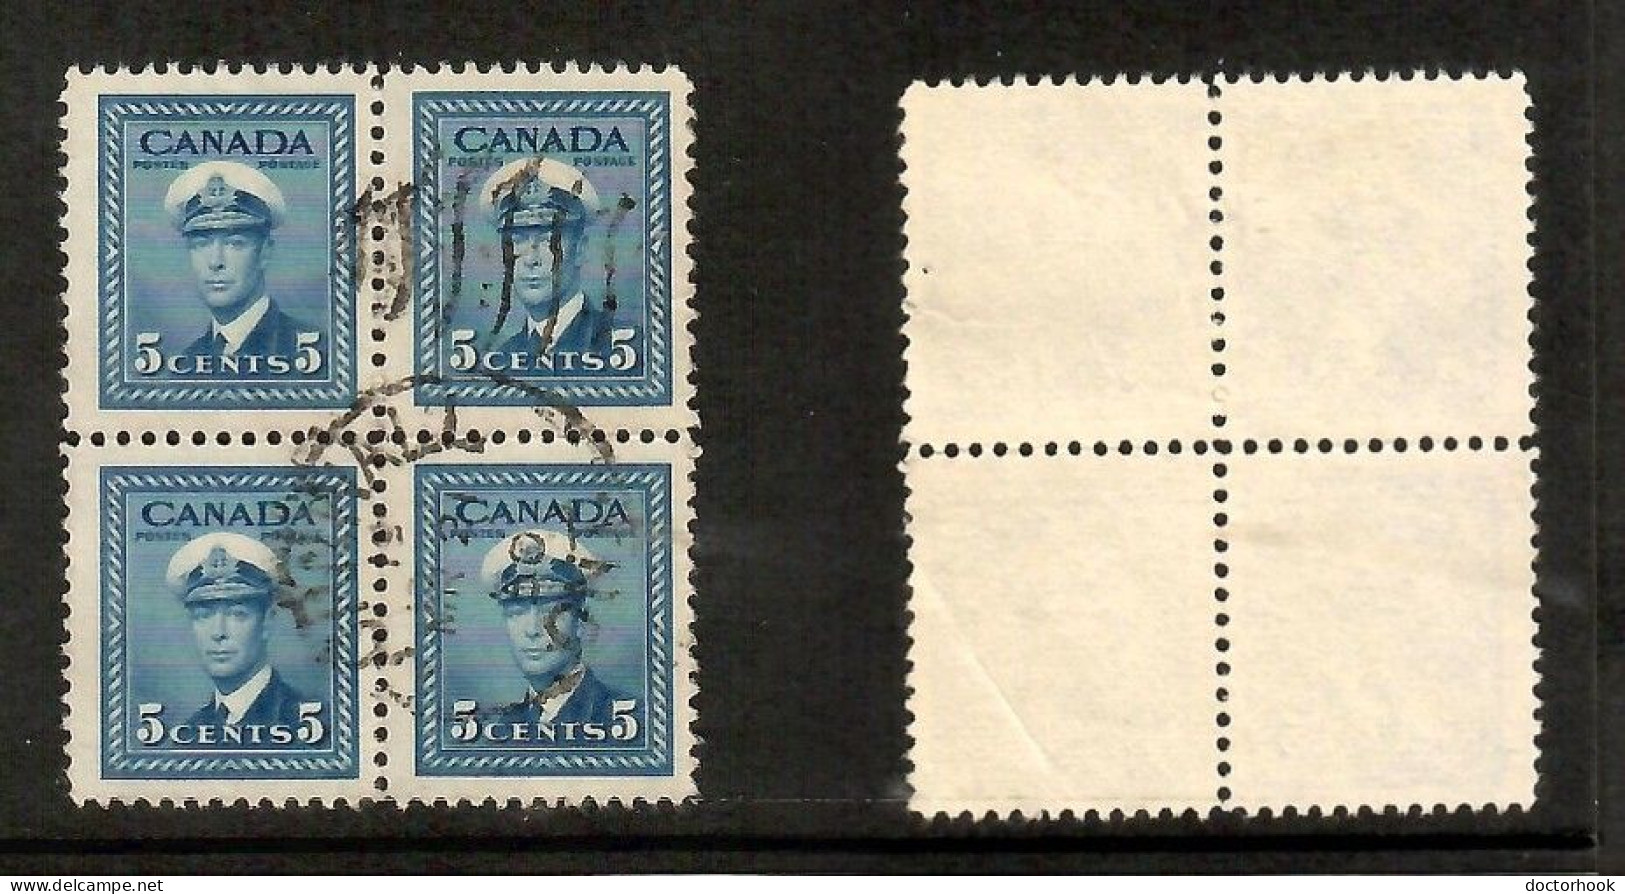 CANADA   Scott # 255 USED BLOCK Of 4 (CONDITION AS PER SCAN) (CAN-210) - Blocs-feuillets